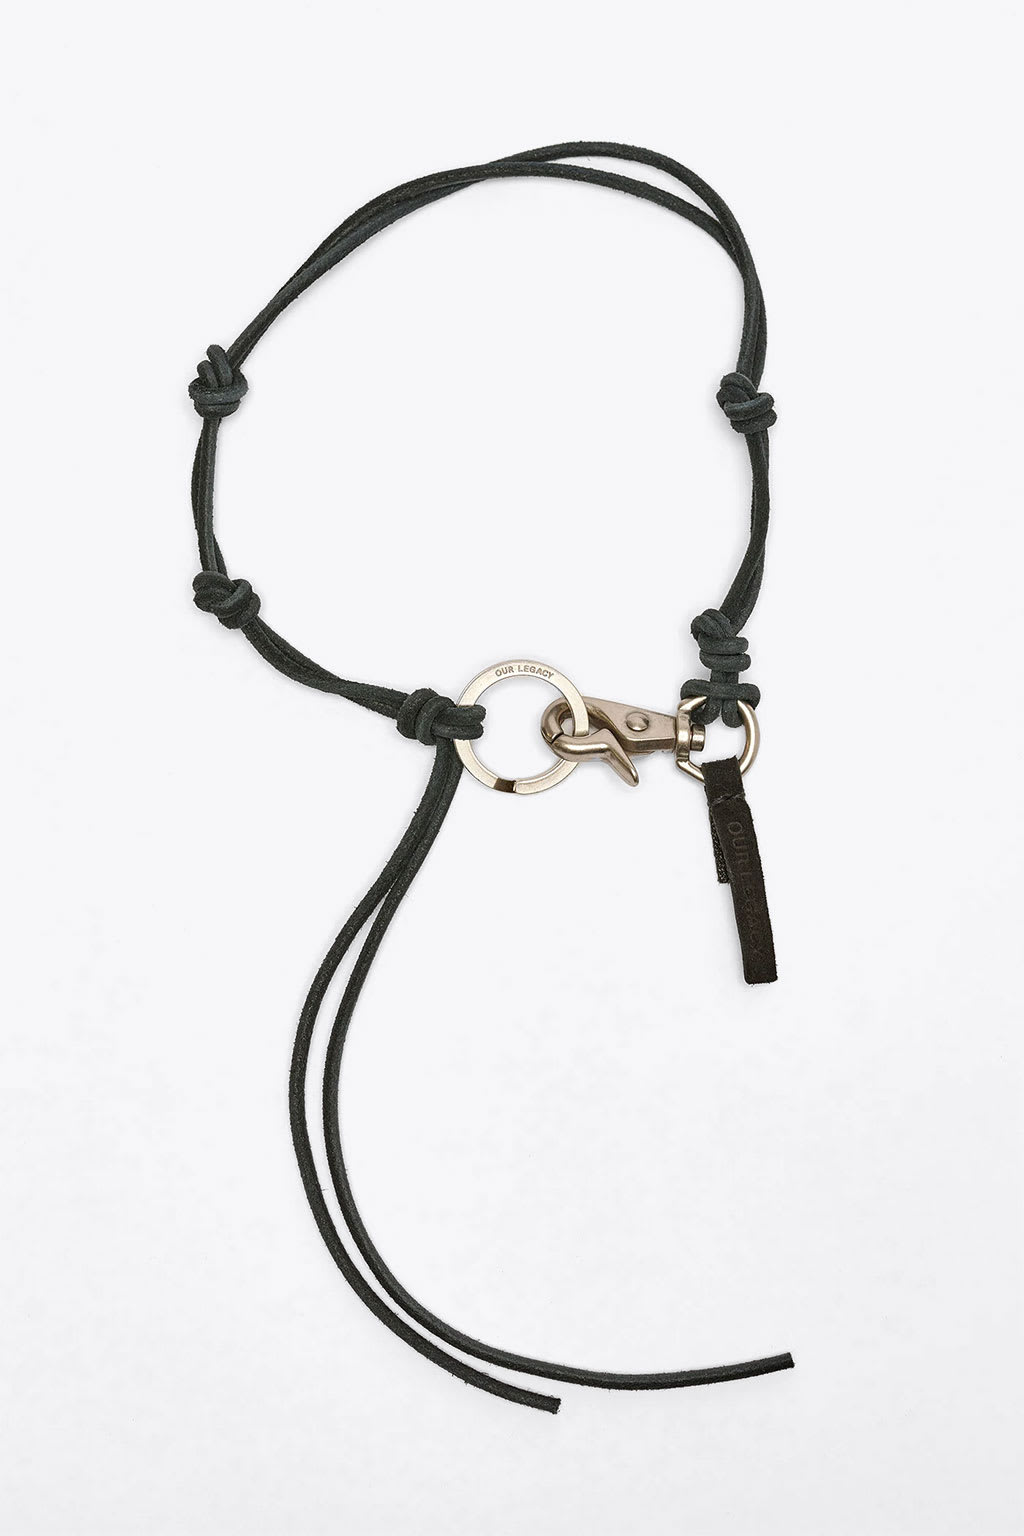 Our Legacy Ladon Black Knotted Leather Cord Key Chain - Ladon In Nero